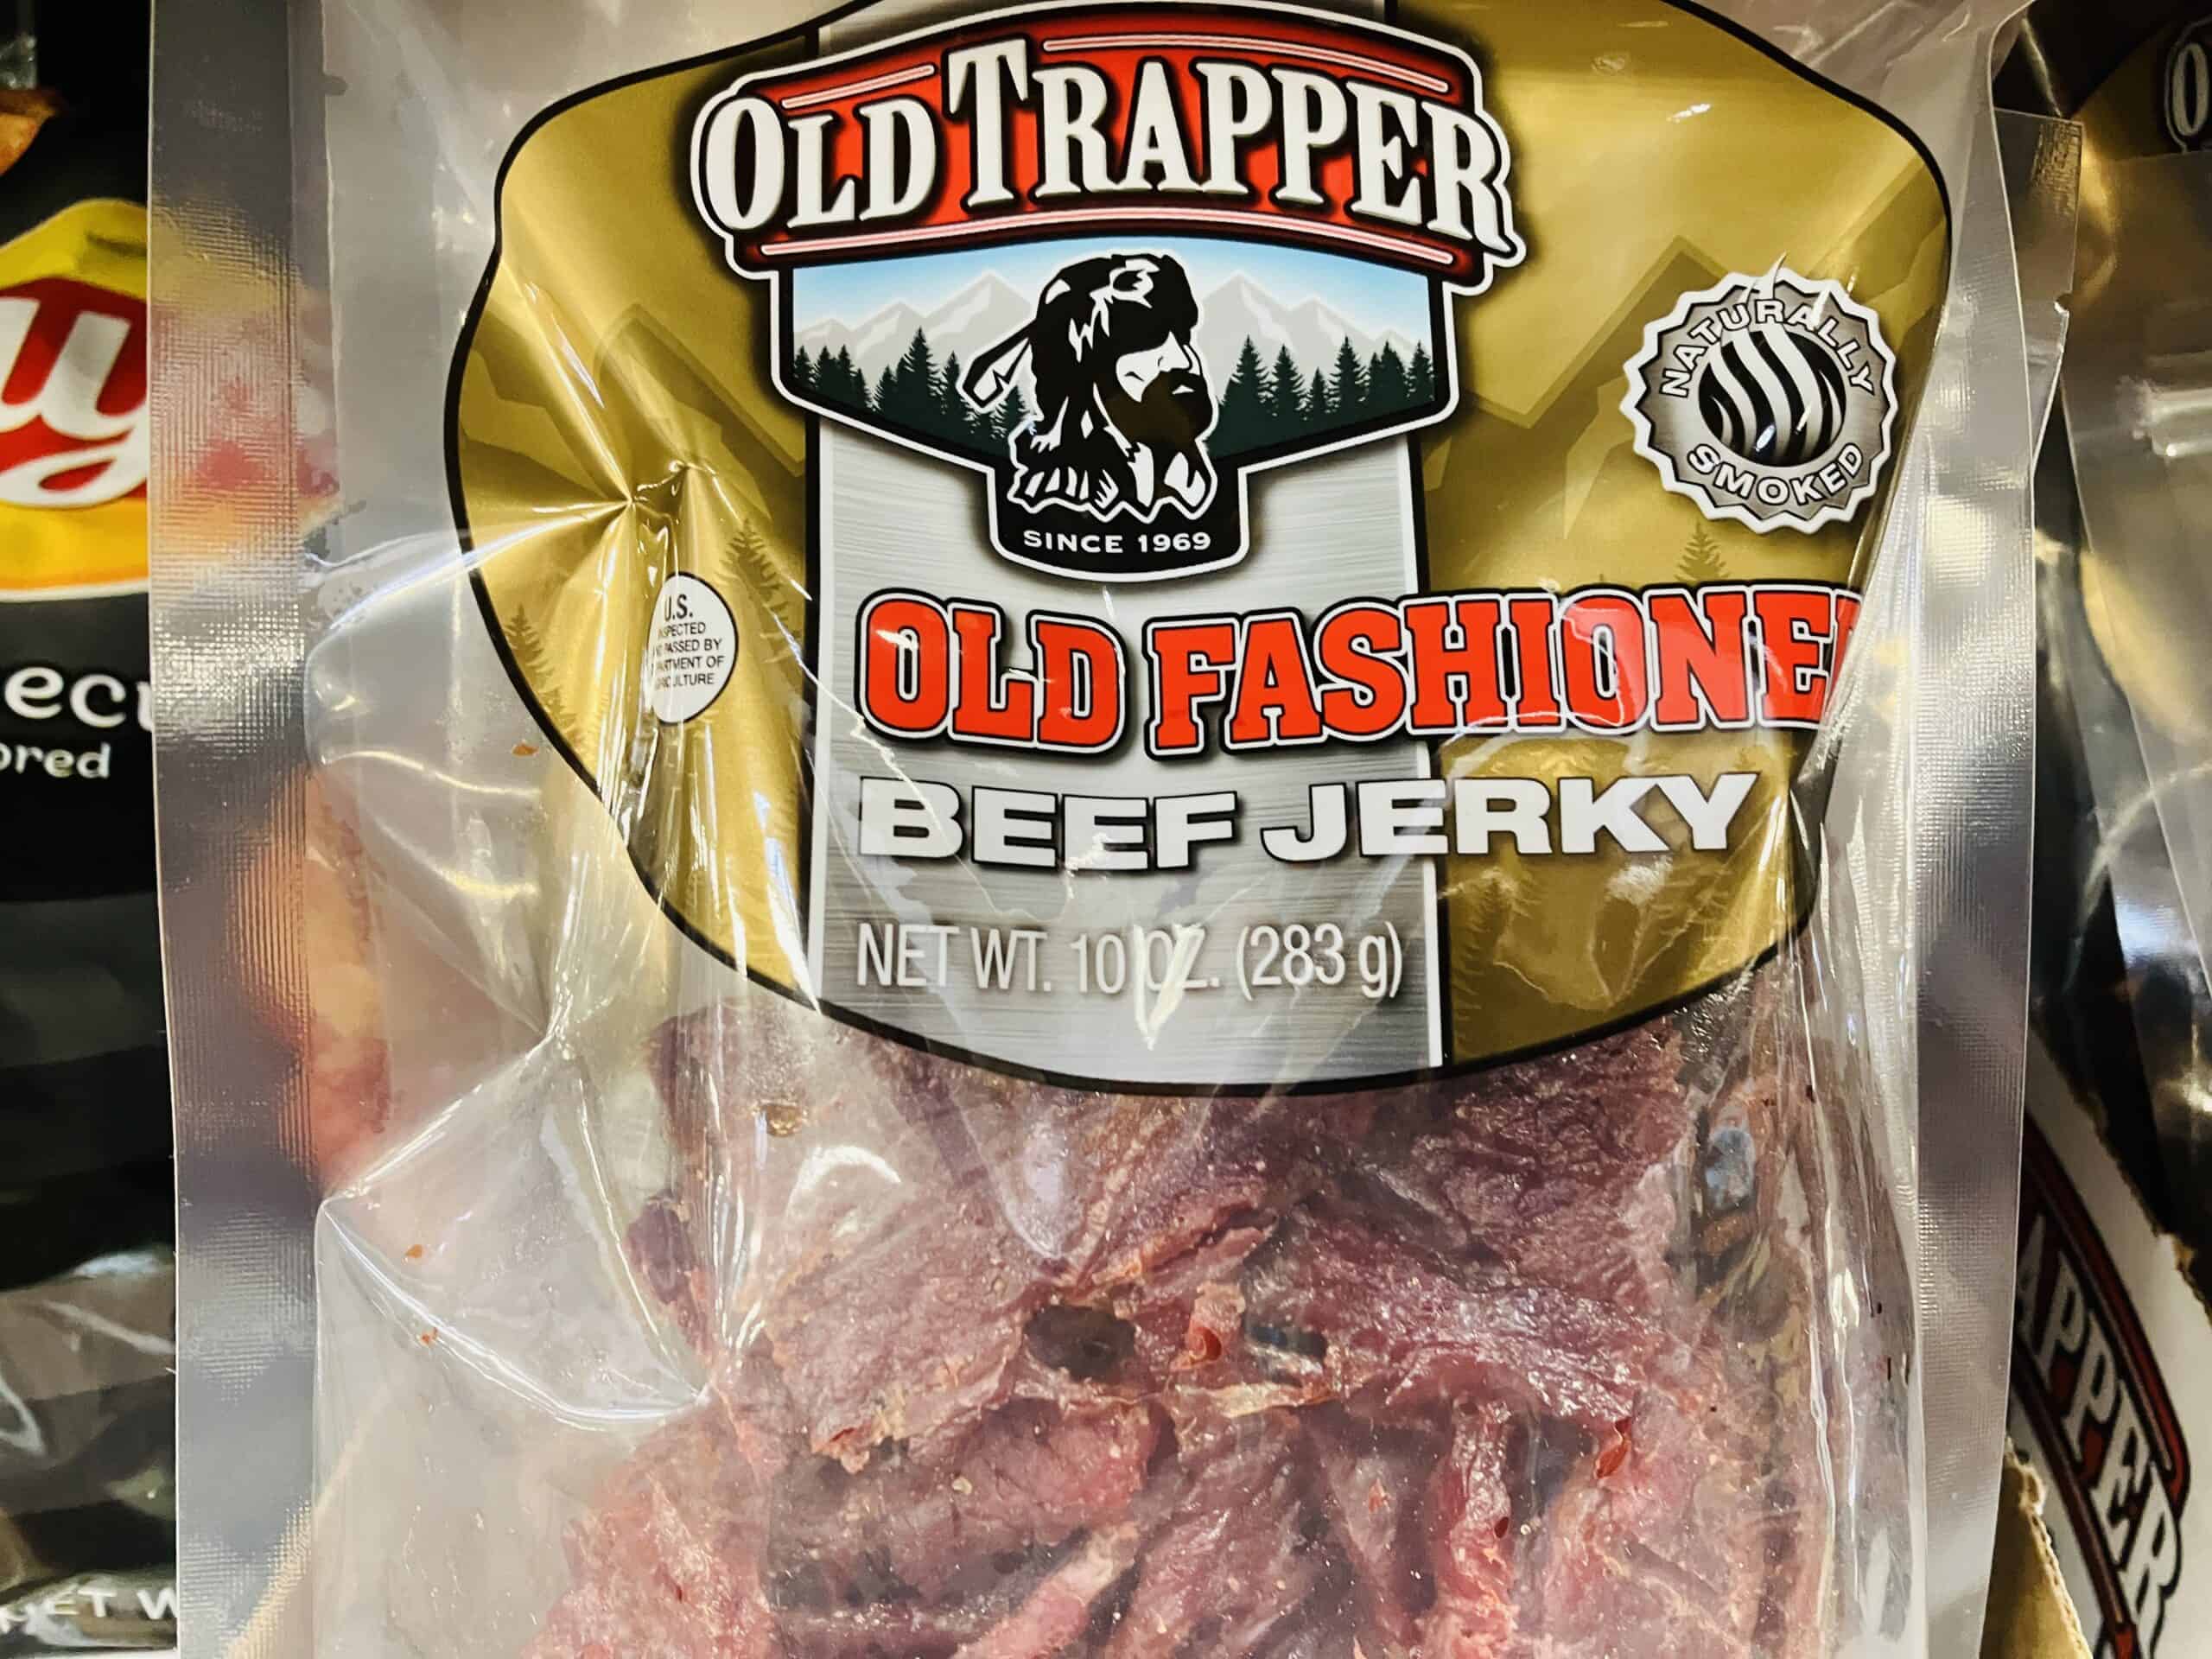 Old Trapper beef jerky